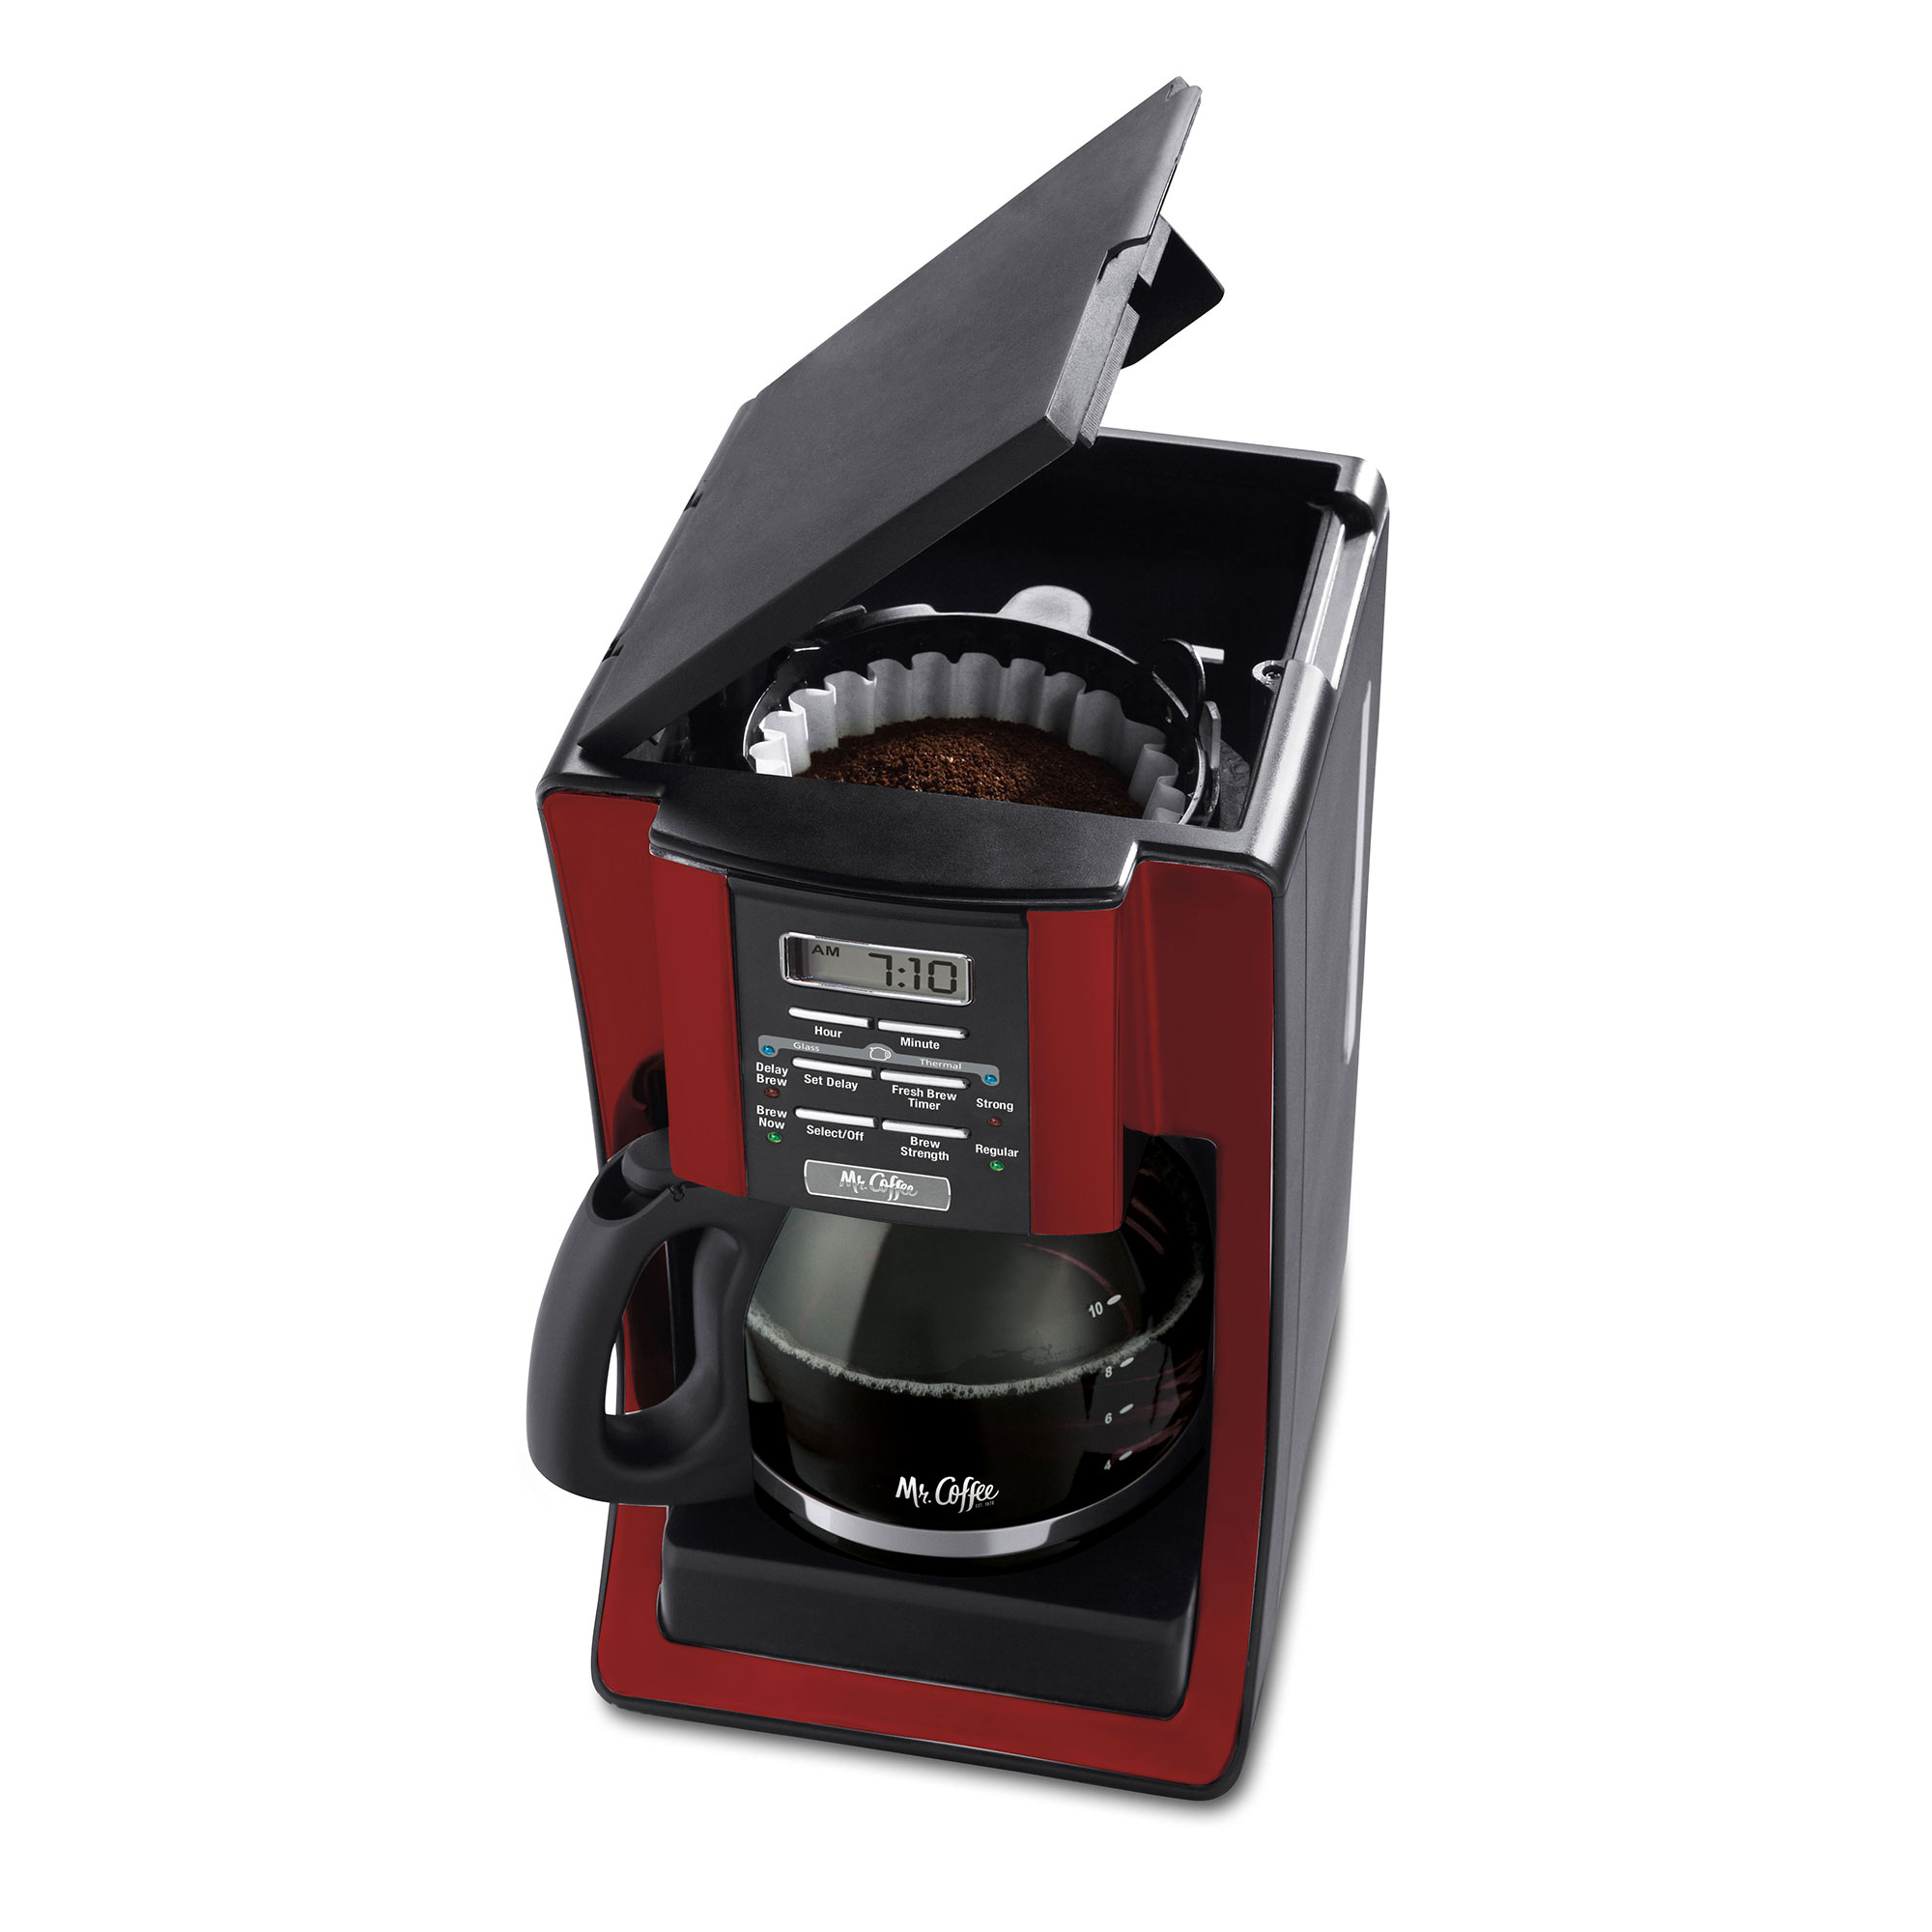 Mr. Coffee BVMCSJX36RB Advanced 12 Cup Programmable Digital Coffee Maker, Red - image 2 of 3